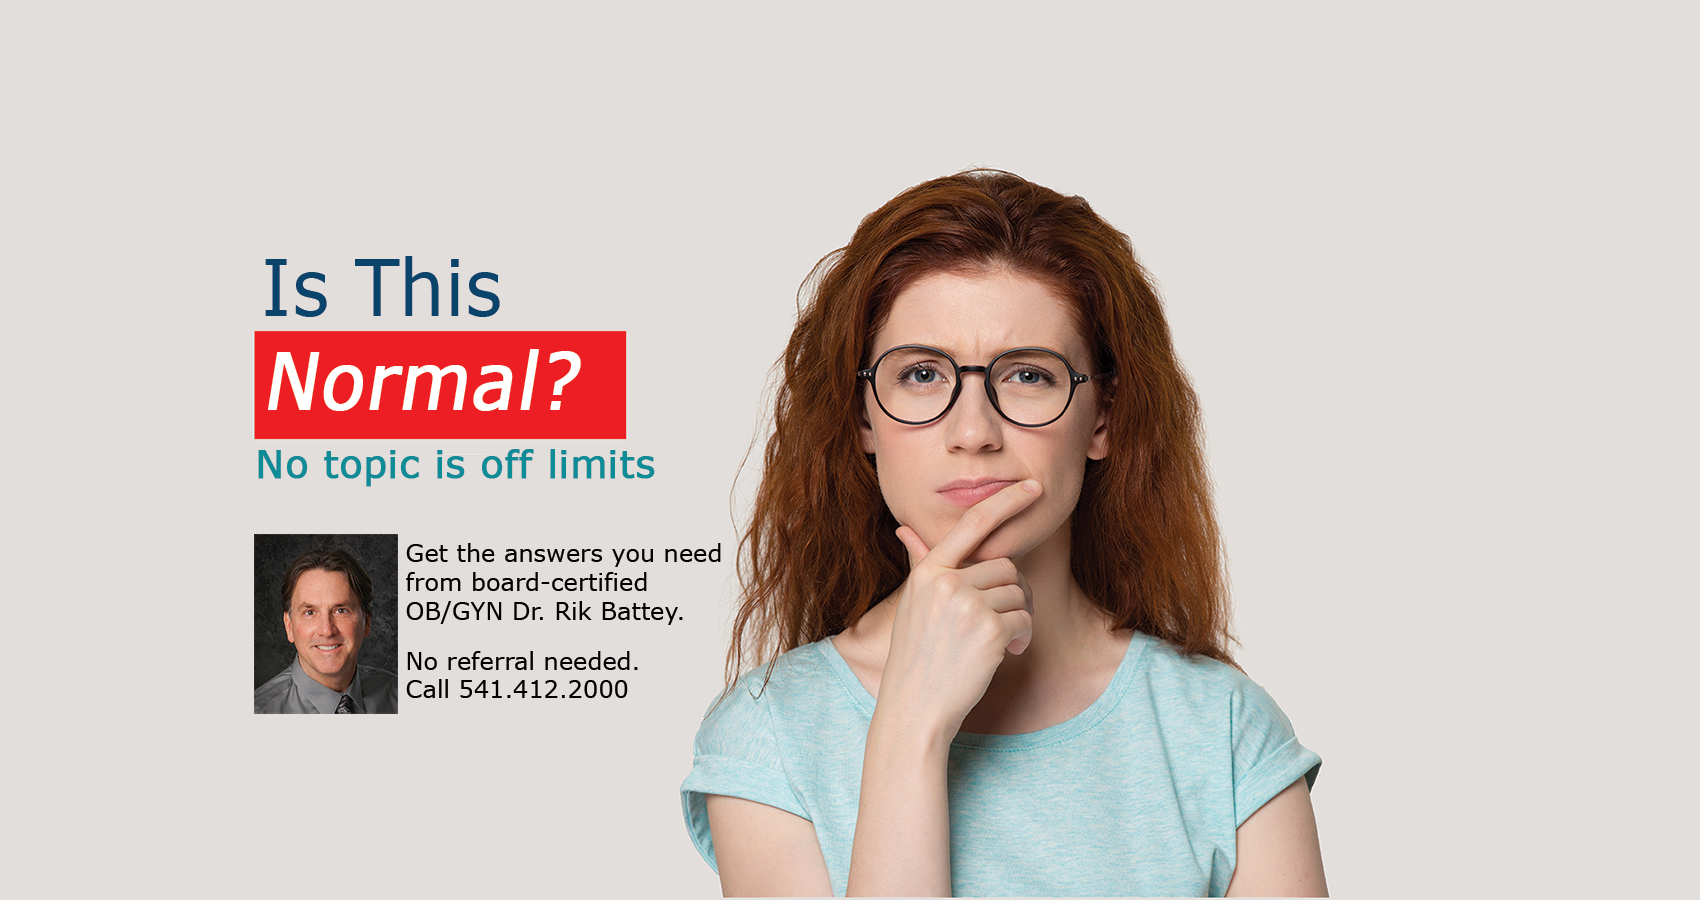 Banner picture of a young woman wondering and looking concerned. Text: Is this normal? No topic is off limits. Get the answers you need from board-certified OB/GYN Dr. Rik Battey. No referral needed. Call 541-412-2000.